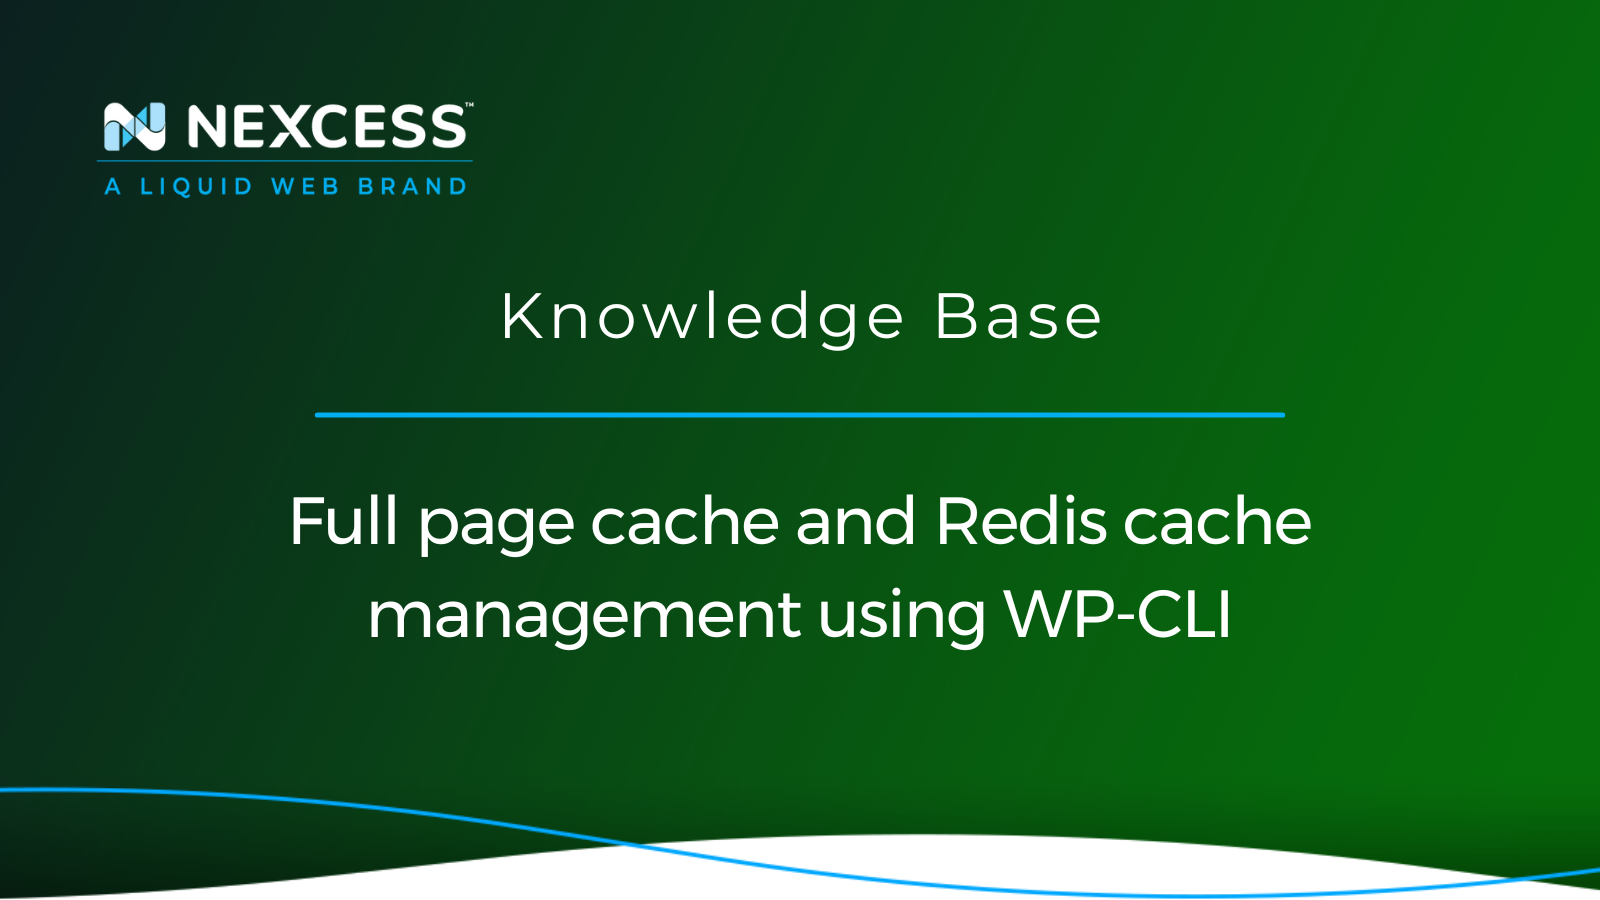 Full page cache and Redis cache management using WP-CLI